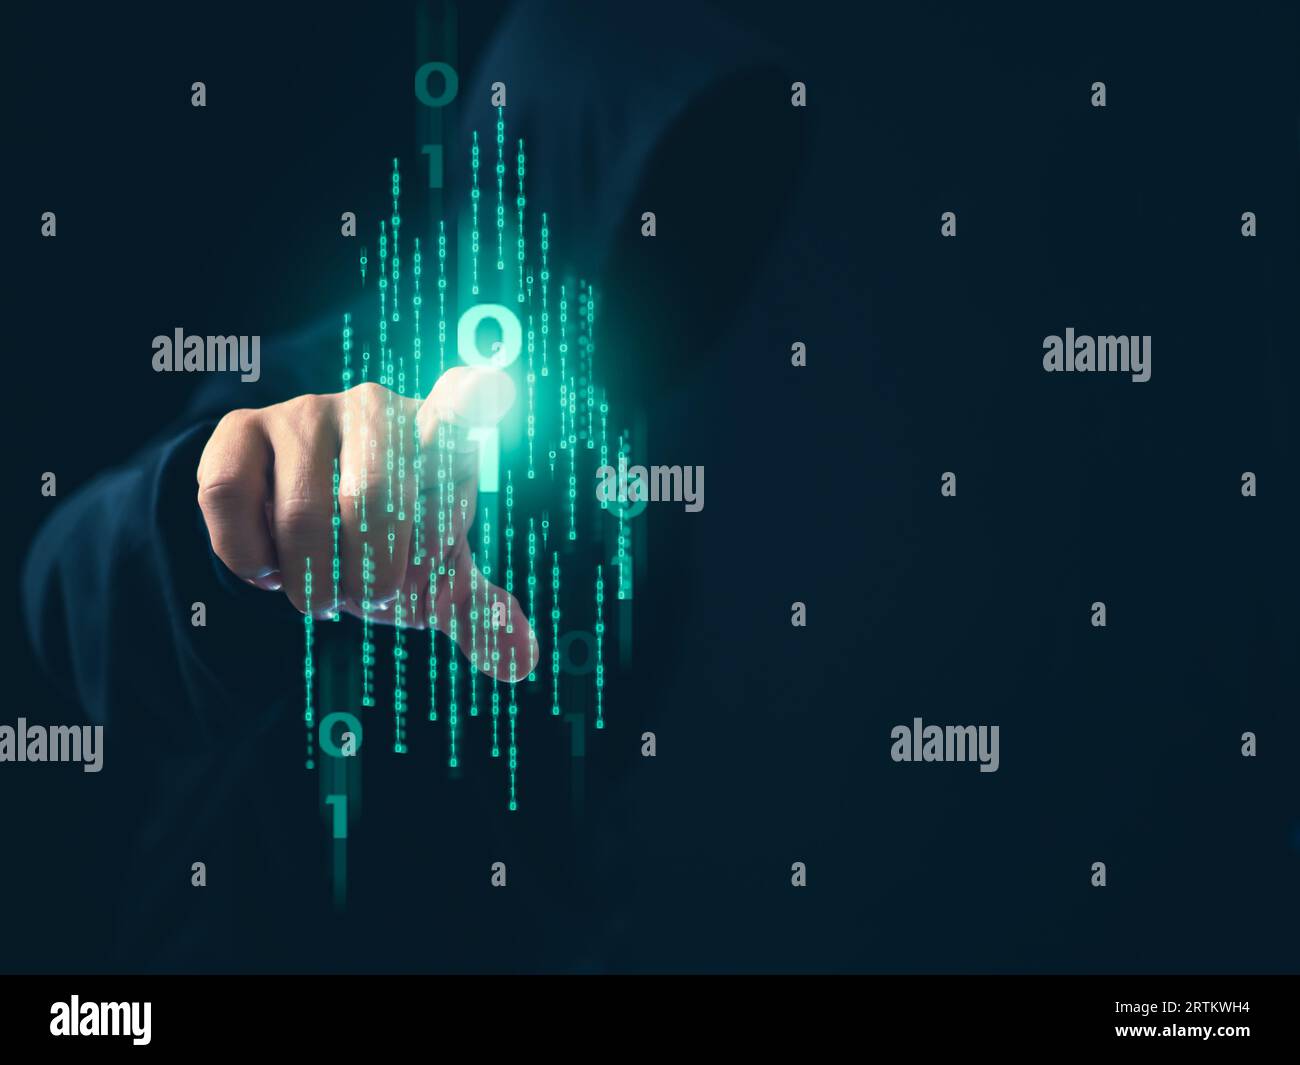 Hacker is pointing his finger at a group of zeros on a dark background. Concept of information security in internet networks and espionage. Stock Photo